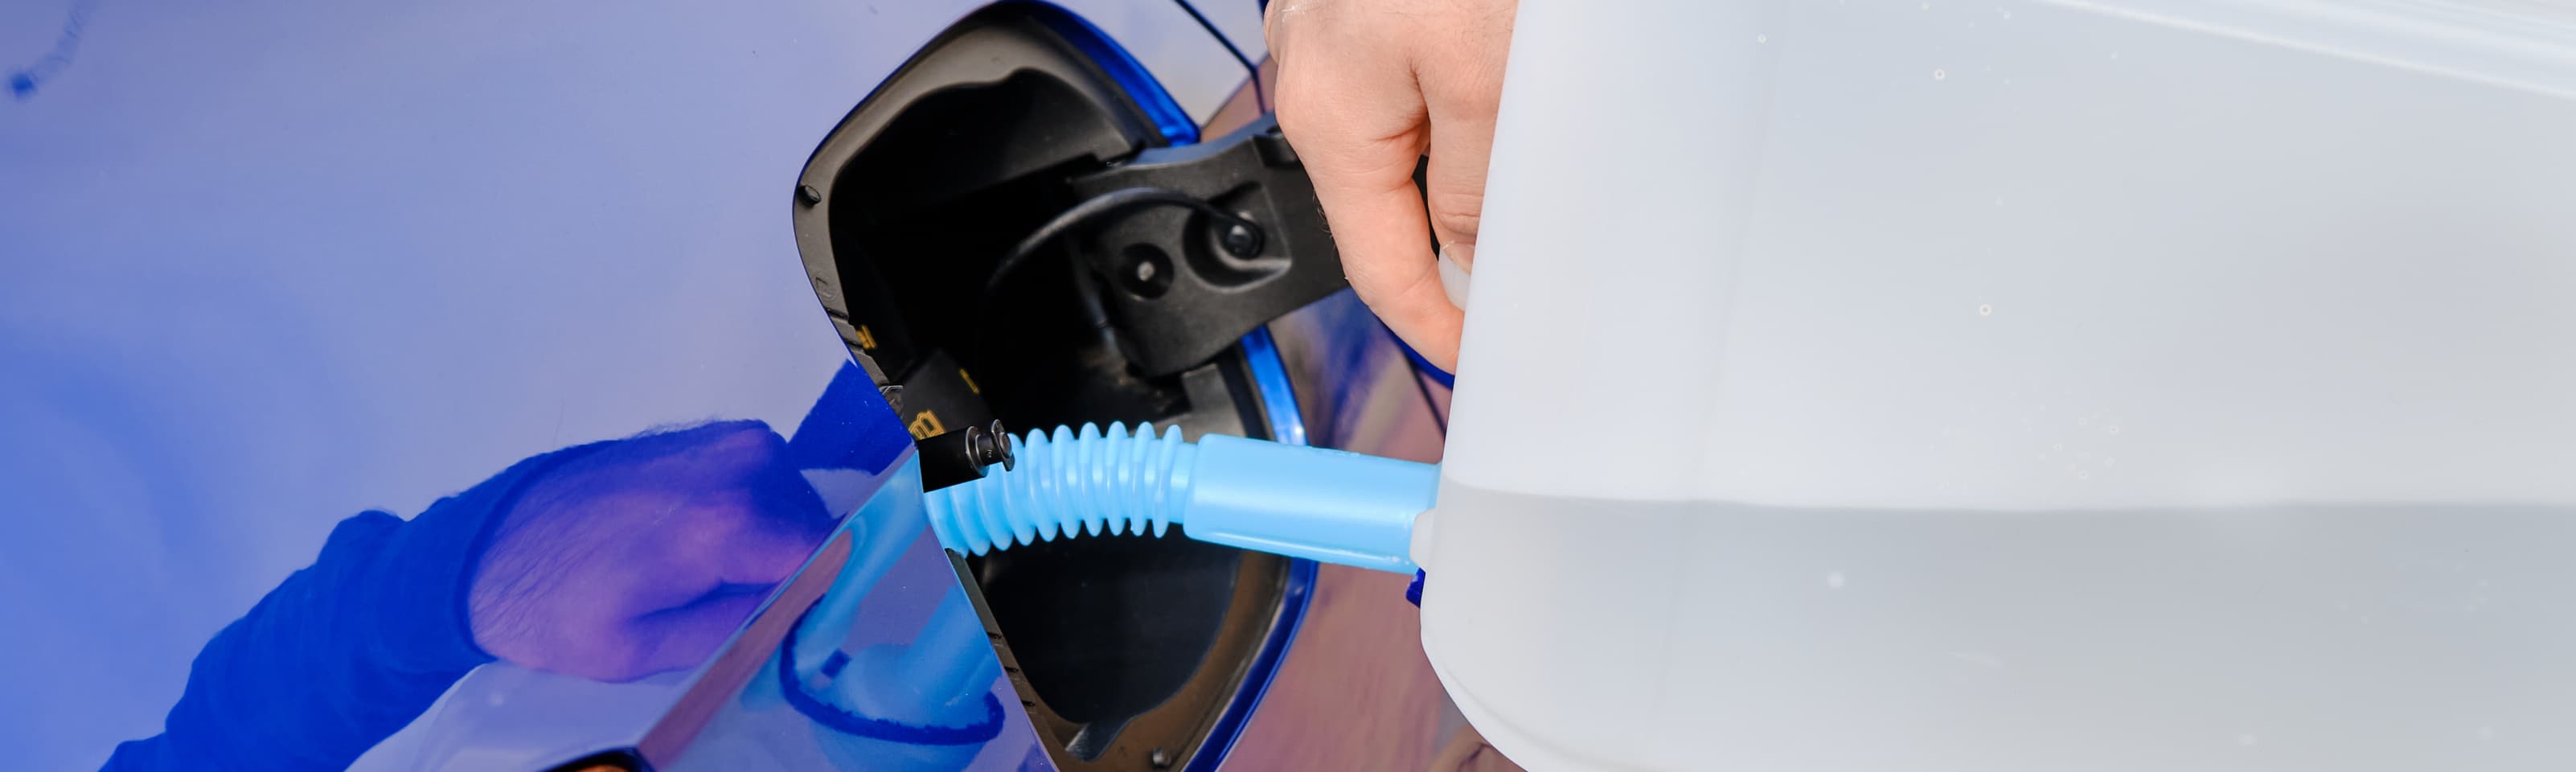 Do you need to refill AdBlue in a rented car or van?